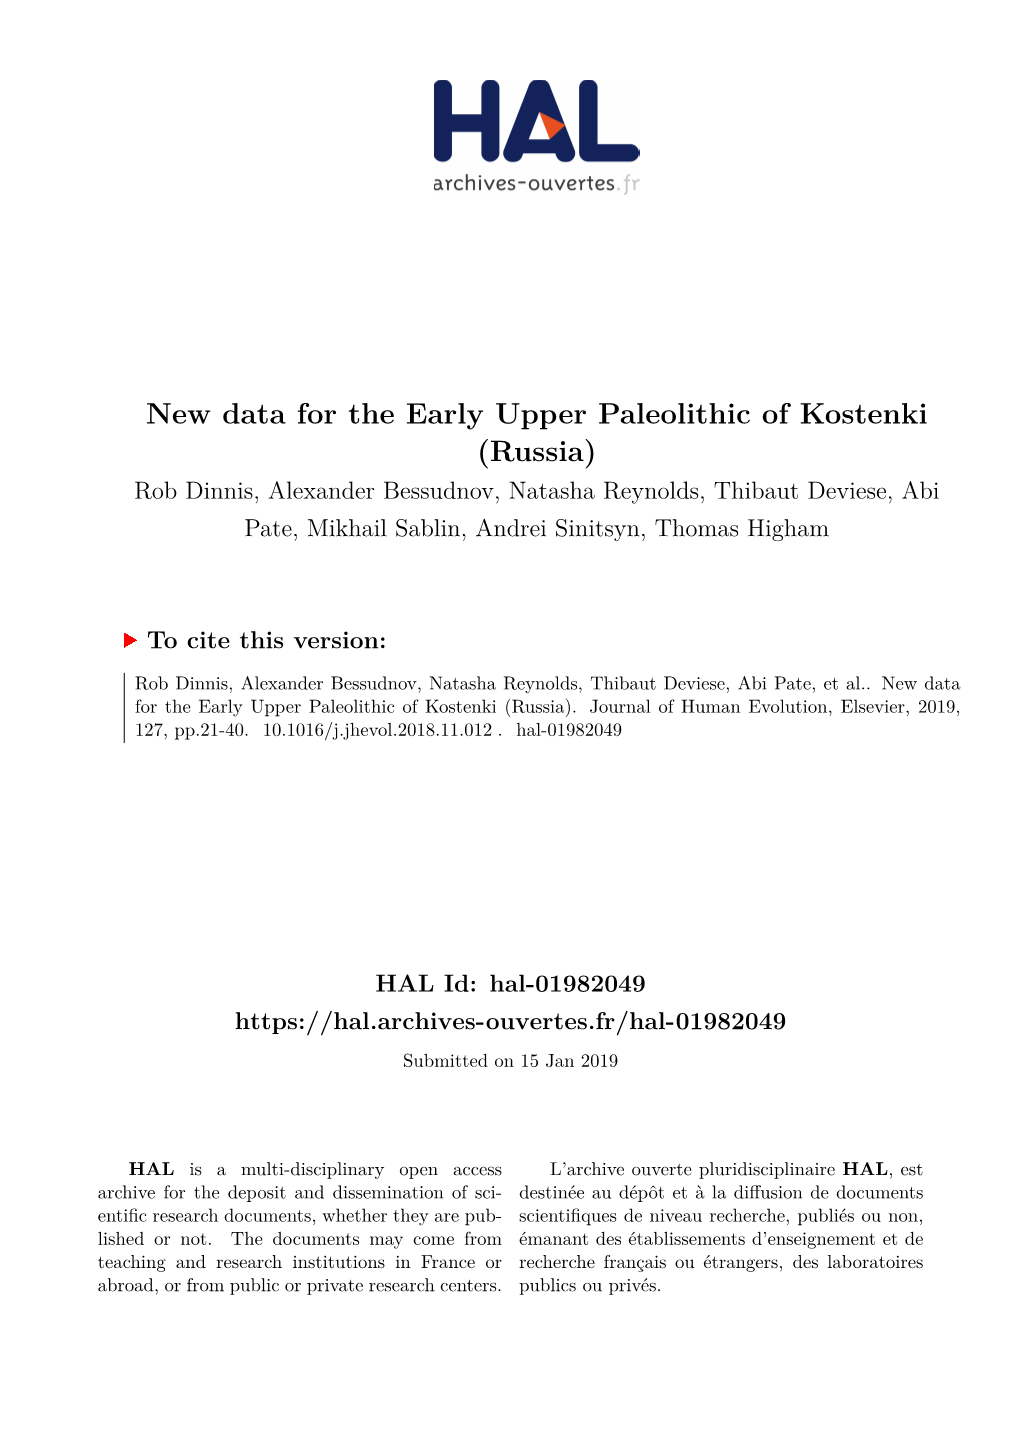 New Data for the Early Upper Paleolithic of Kostenki (Russia)